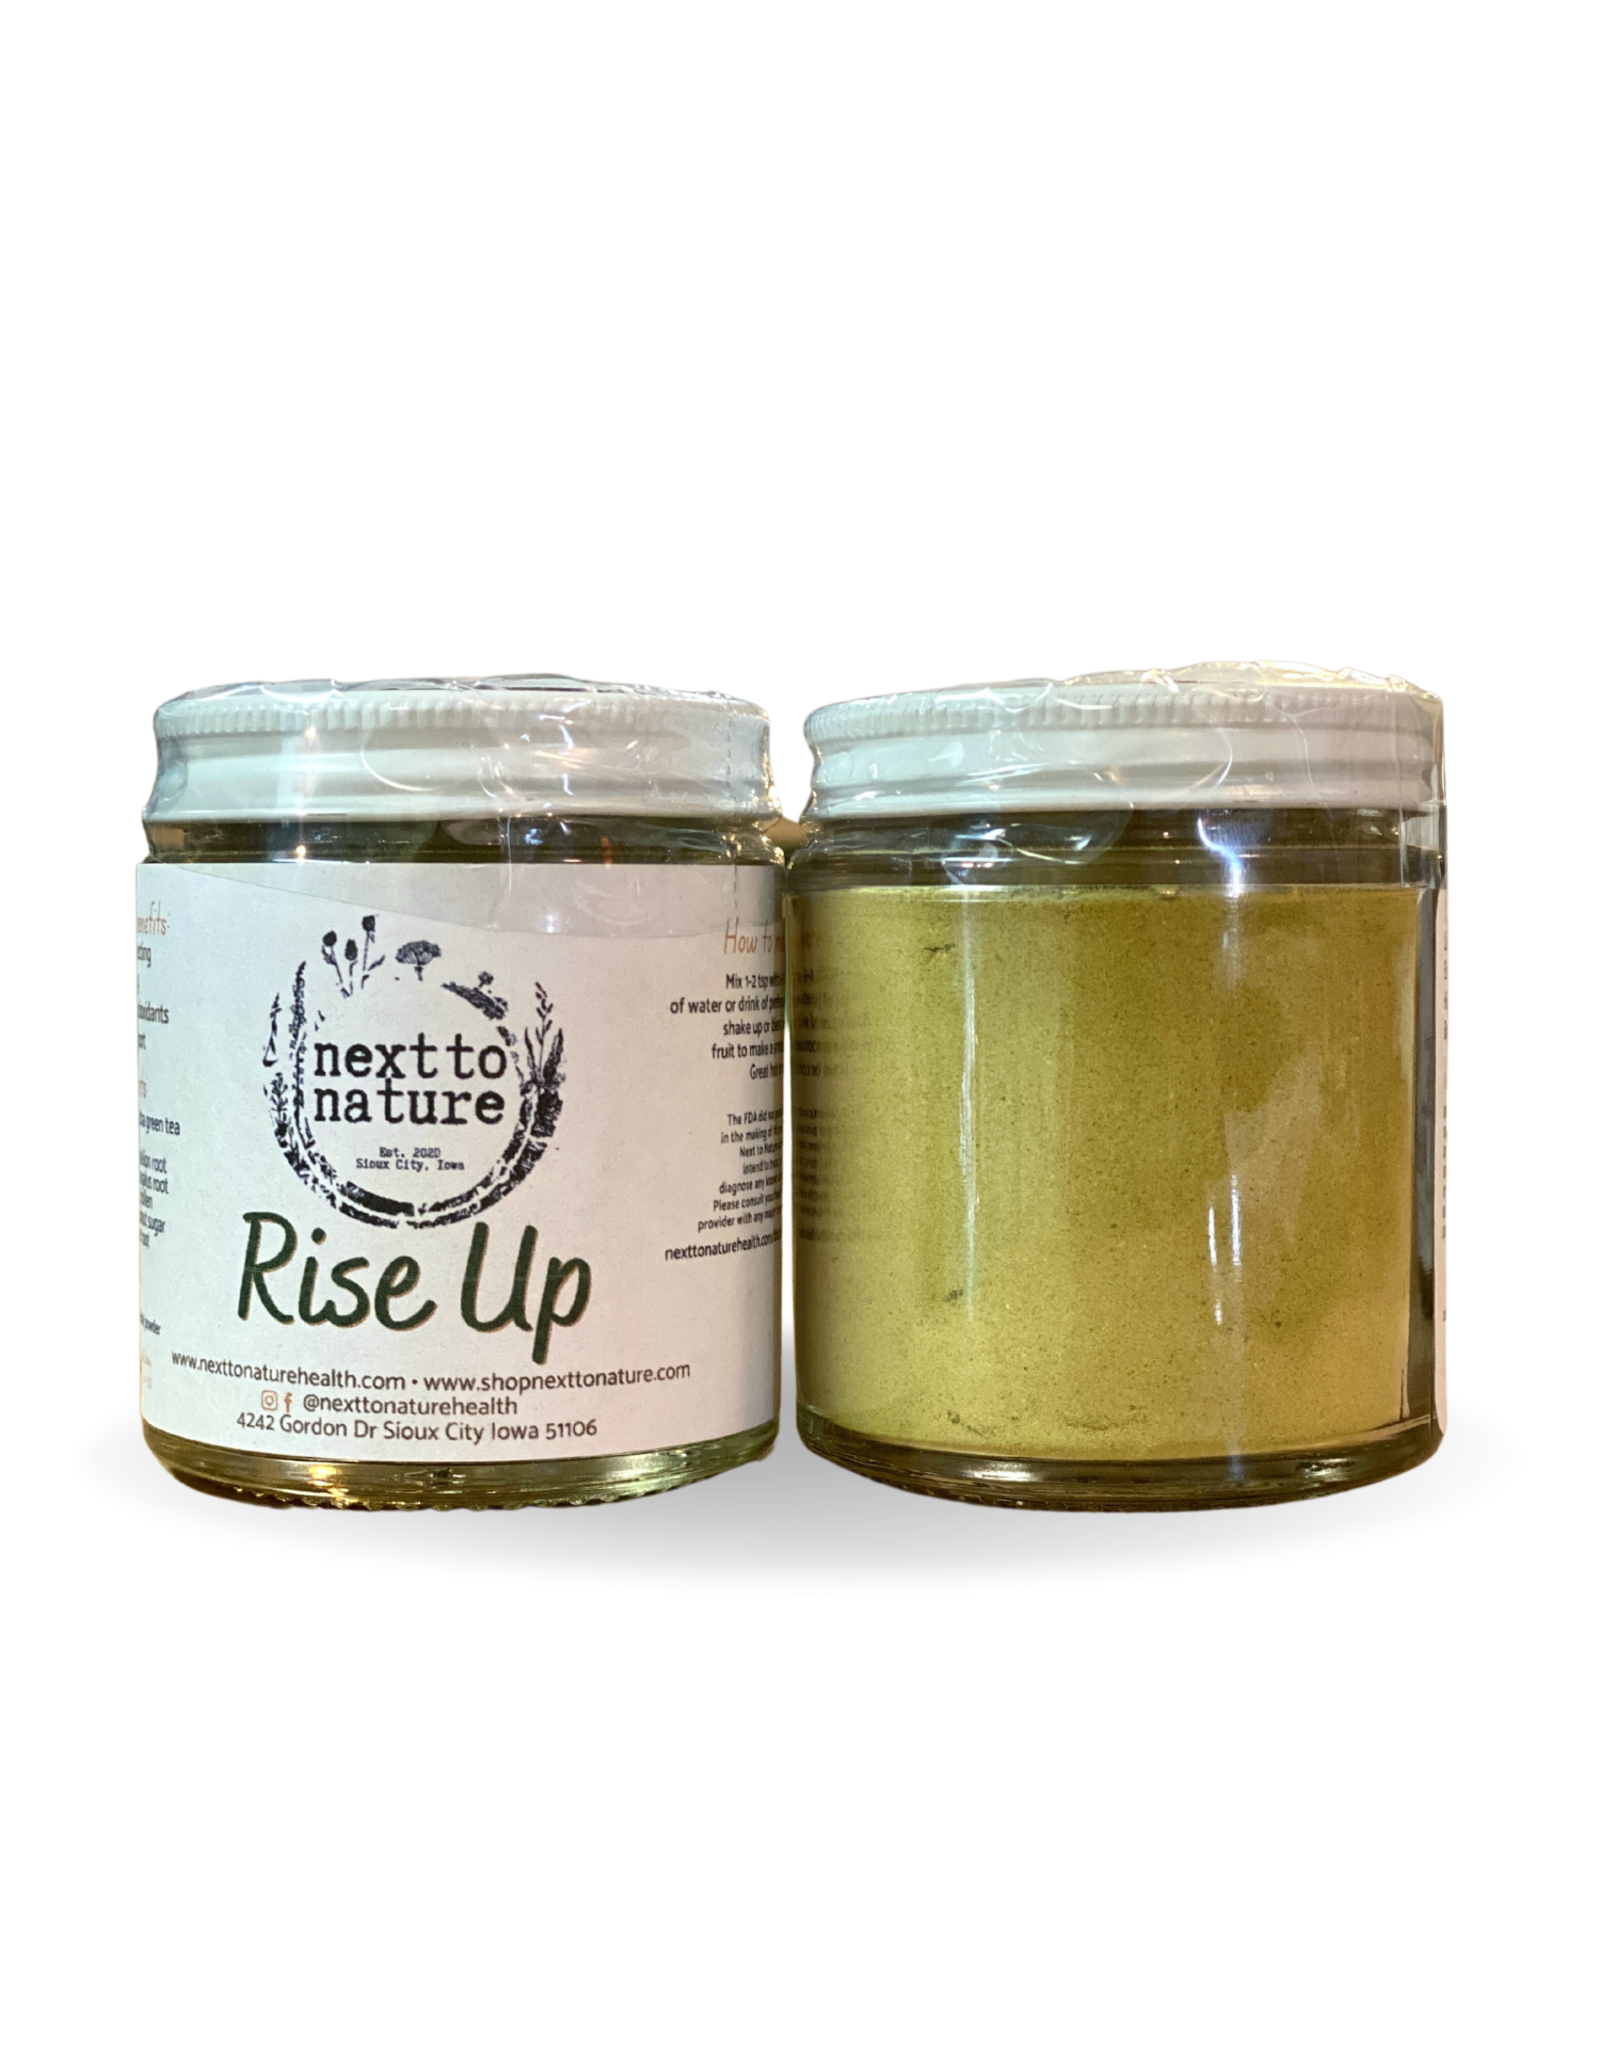 Rise Up Herbal Powder by Next to Nature